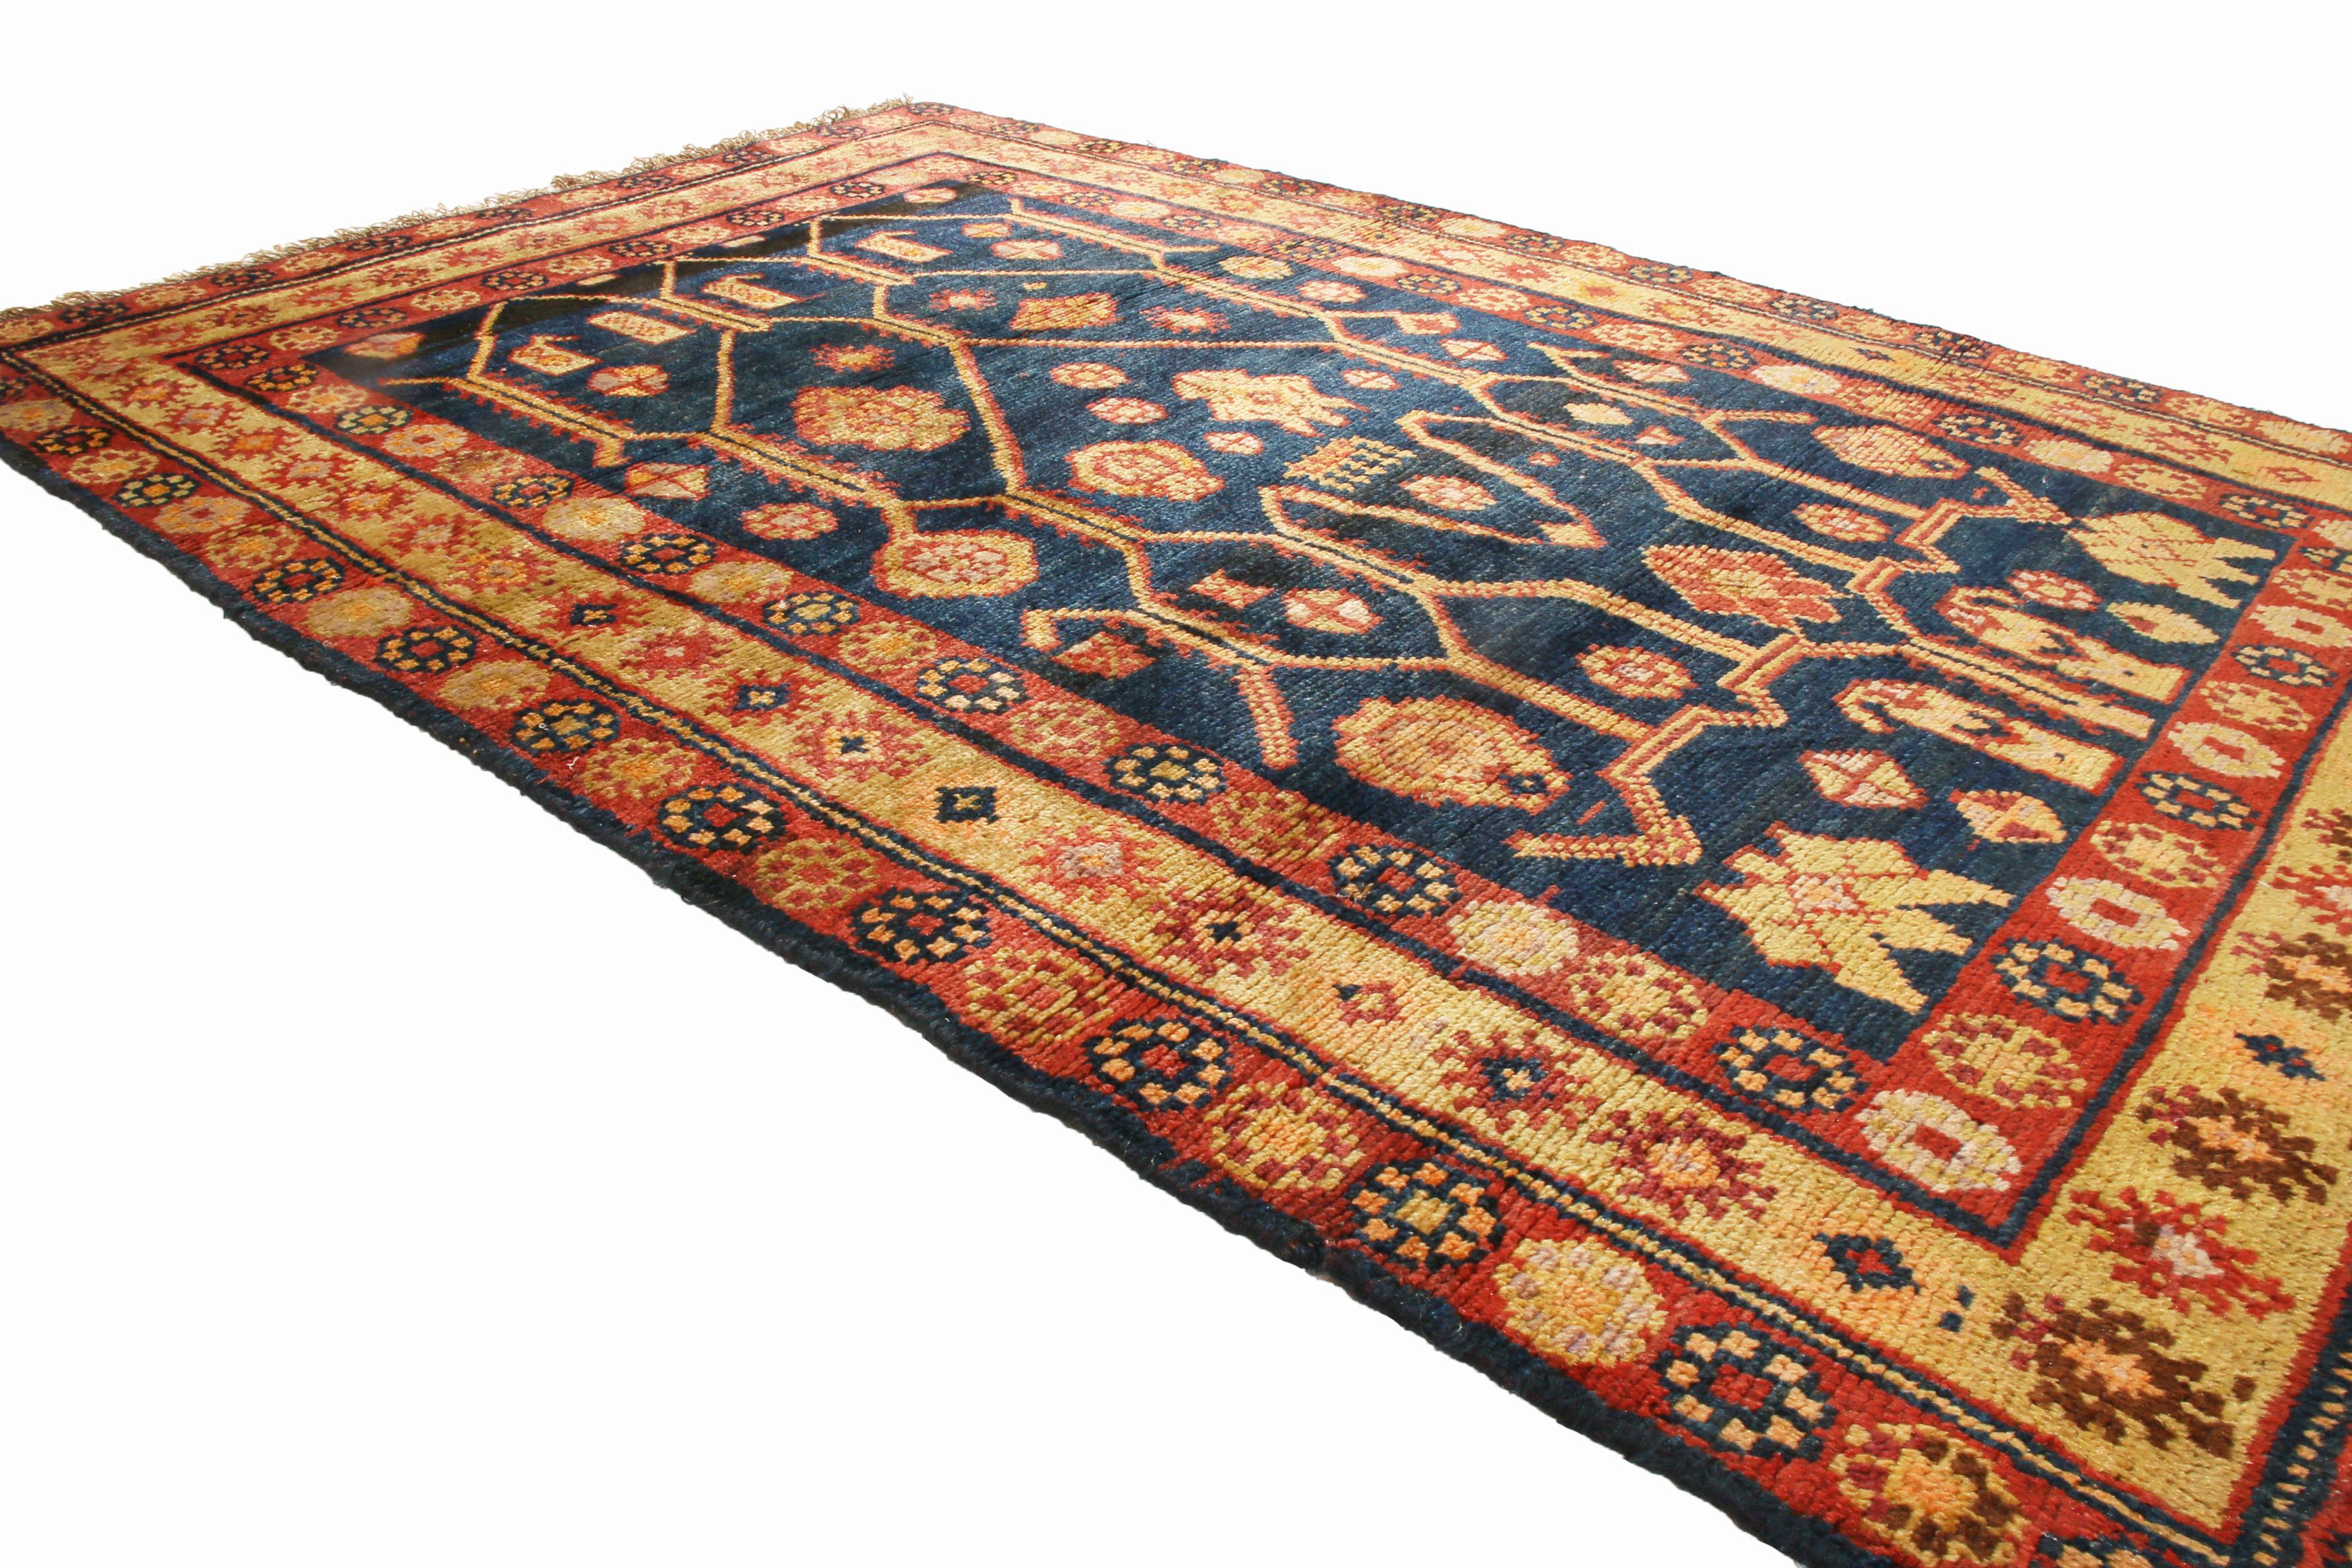 Originating from East Turkestan, this antique traditional Samarkand wool rug features a distinguished field design with an intriguing combination of mirrored and asymmetric symbolism. Hand knotted in high quality, luminous wool, while the red and